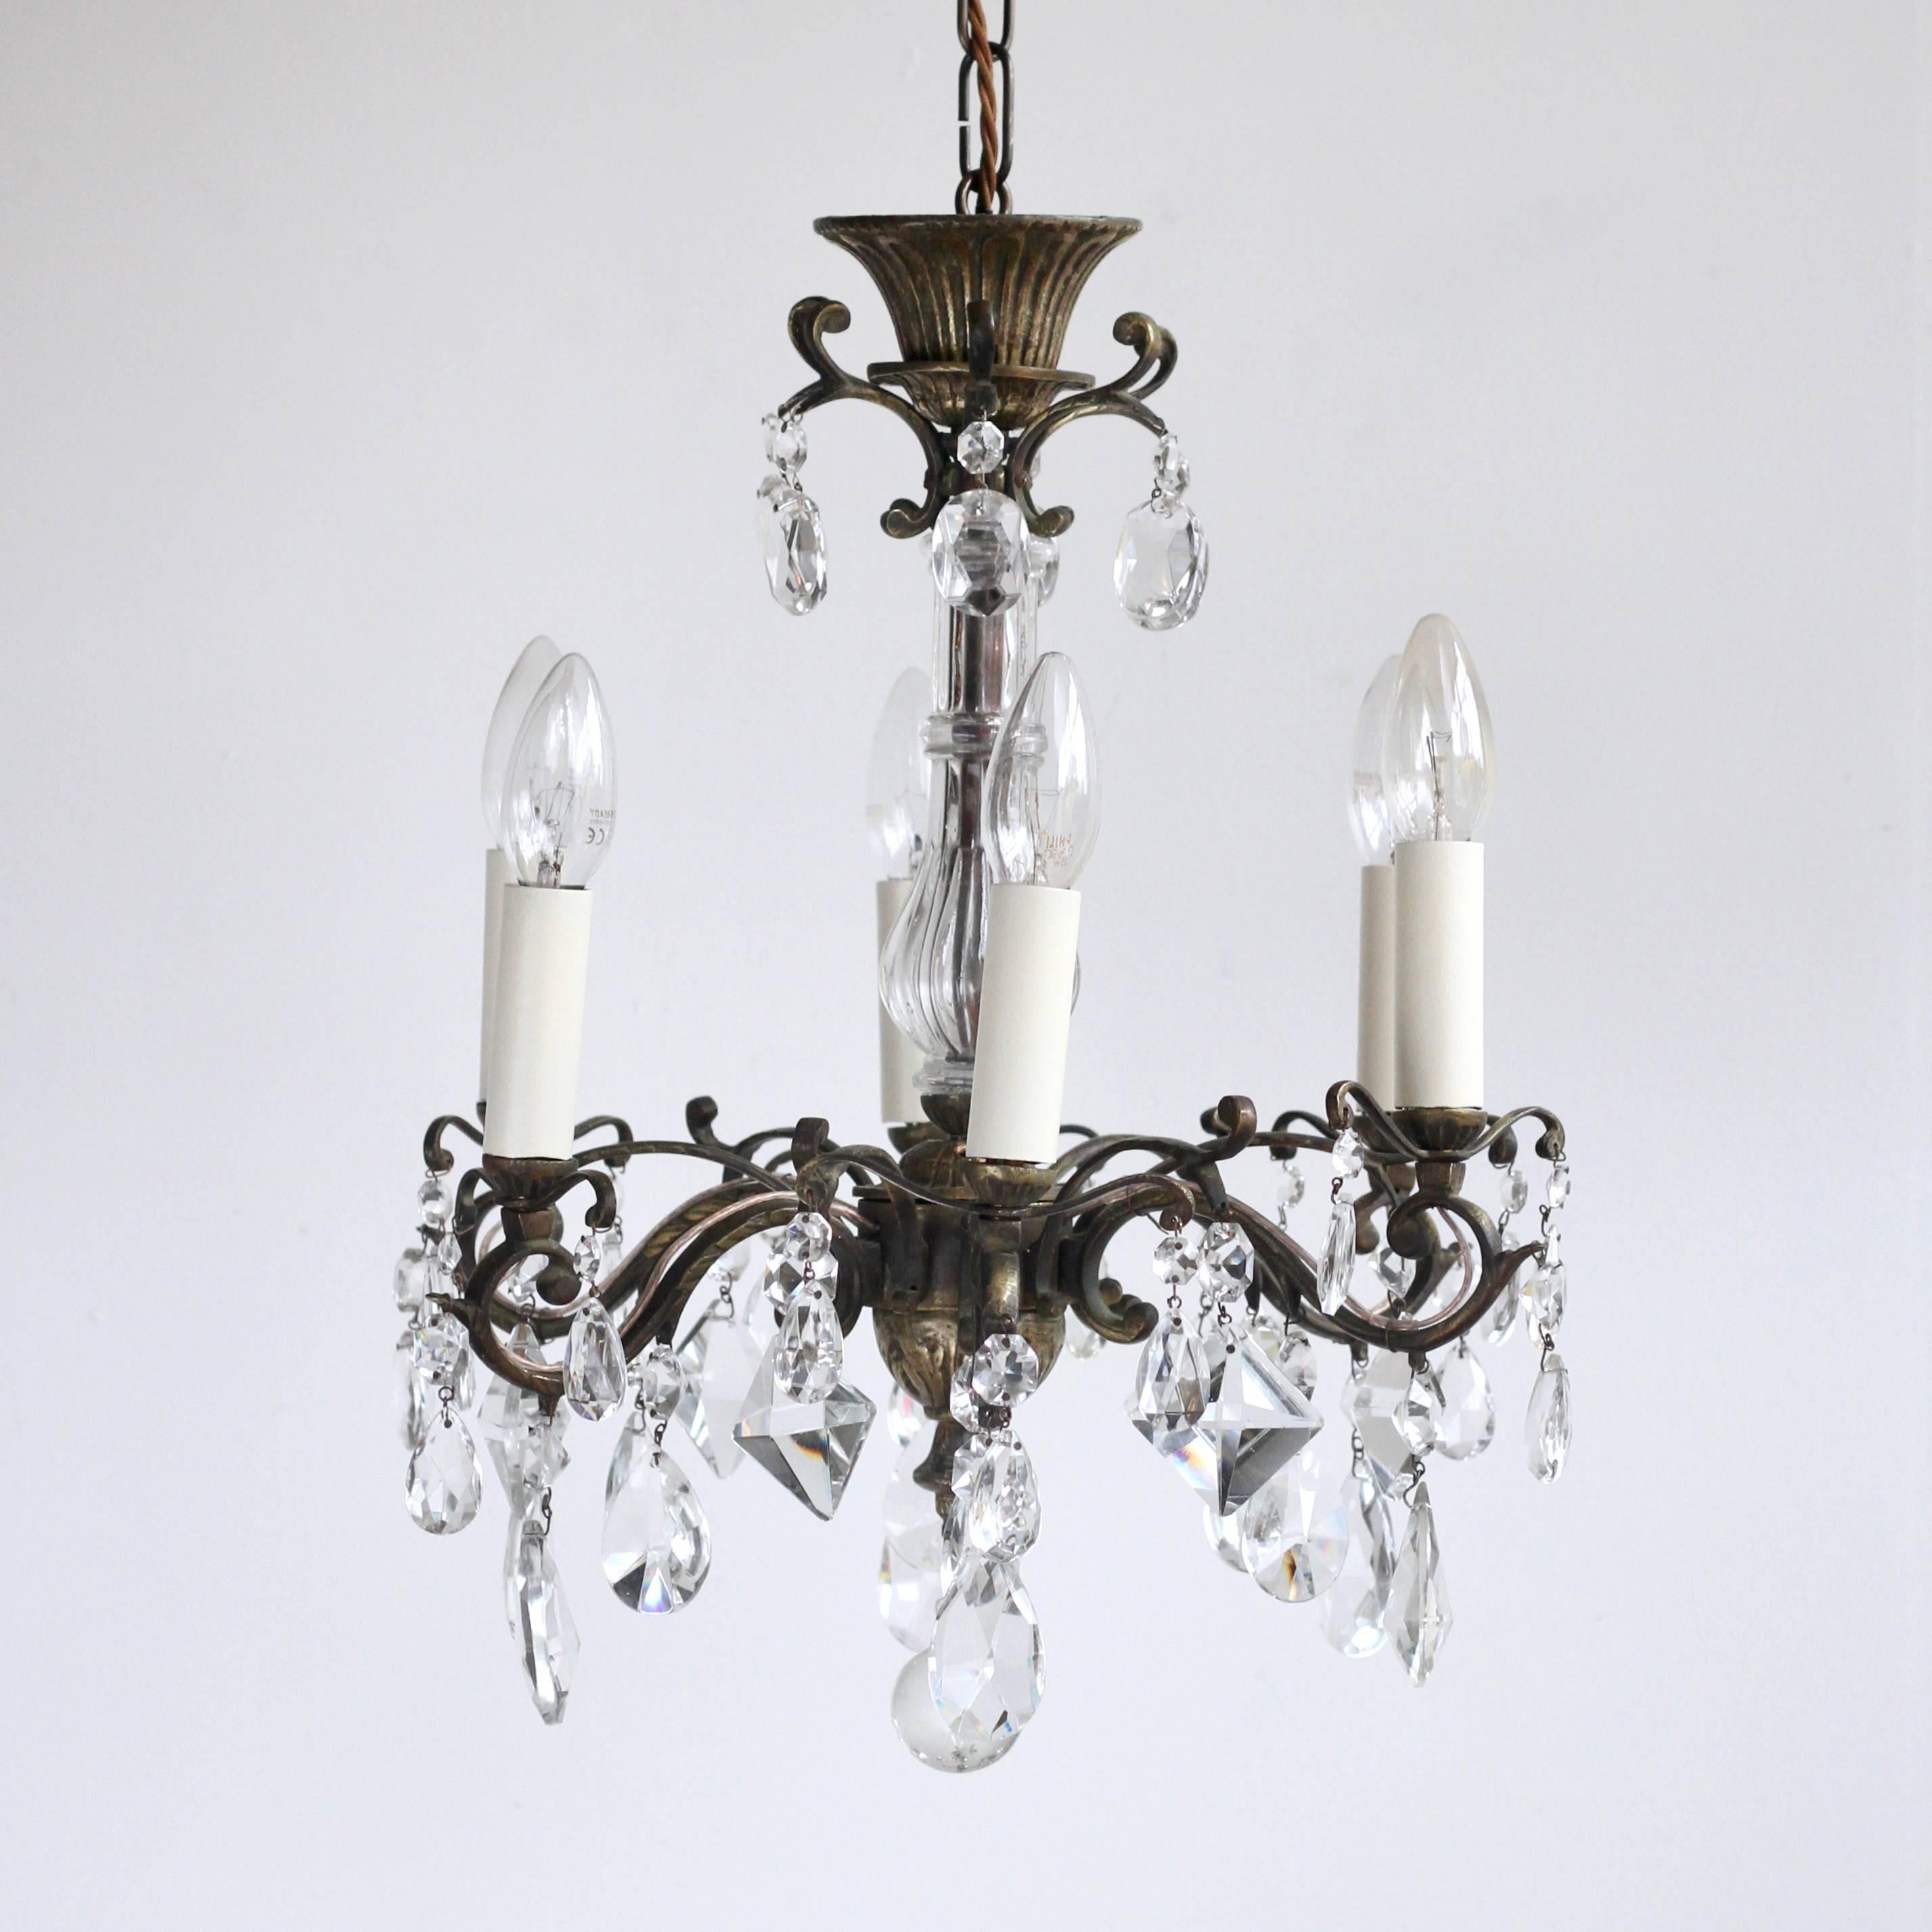 This pretty French chandelier is an excellent example of a quality early 1900s brass and crystal chandelier. The brass frame is beautifully elegant with a simple design with added decorative pieces that are understated yet refined. There is a glass